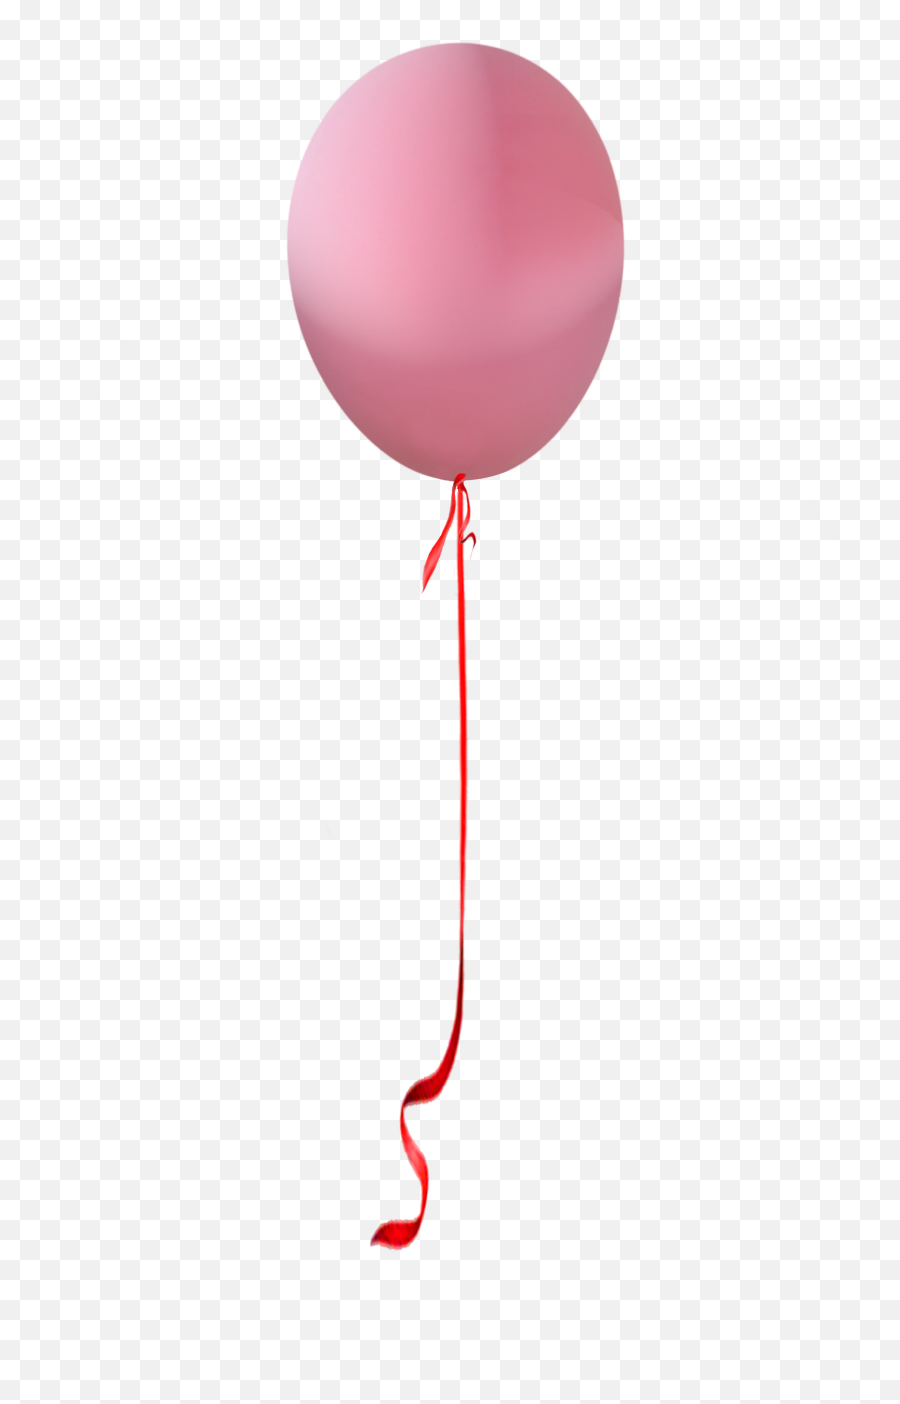 Download Free Png Hd Balloon String - Balloon,String Png - free transparent  png images 